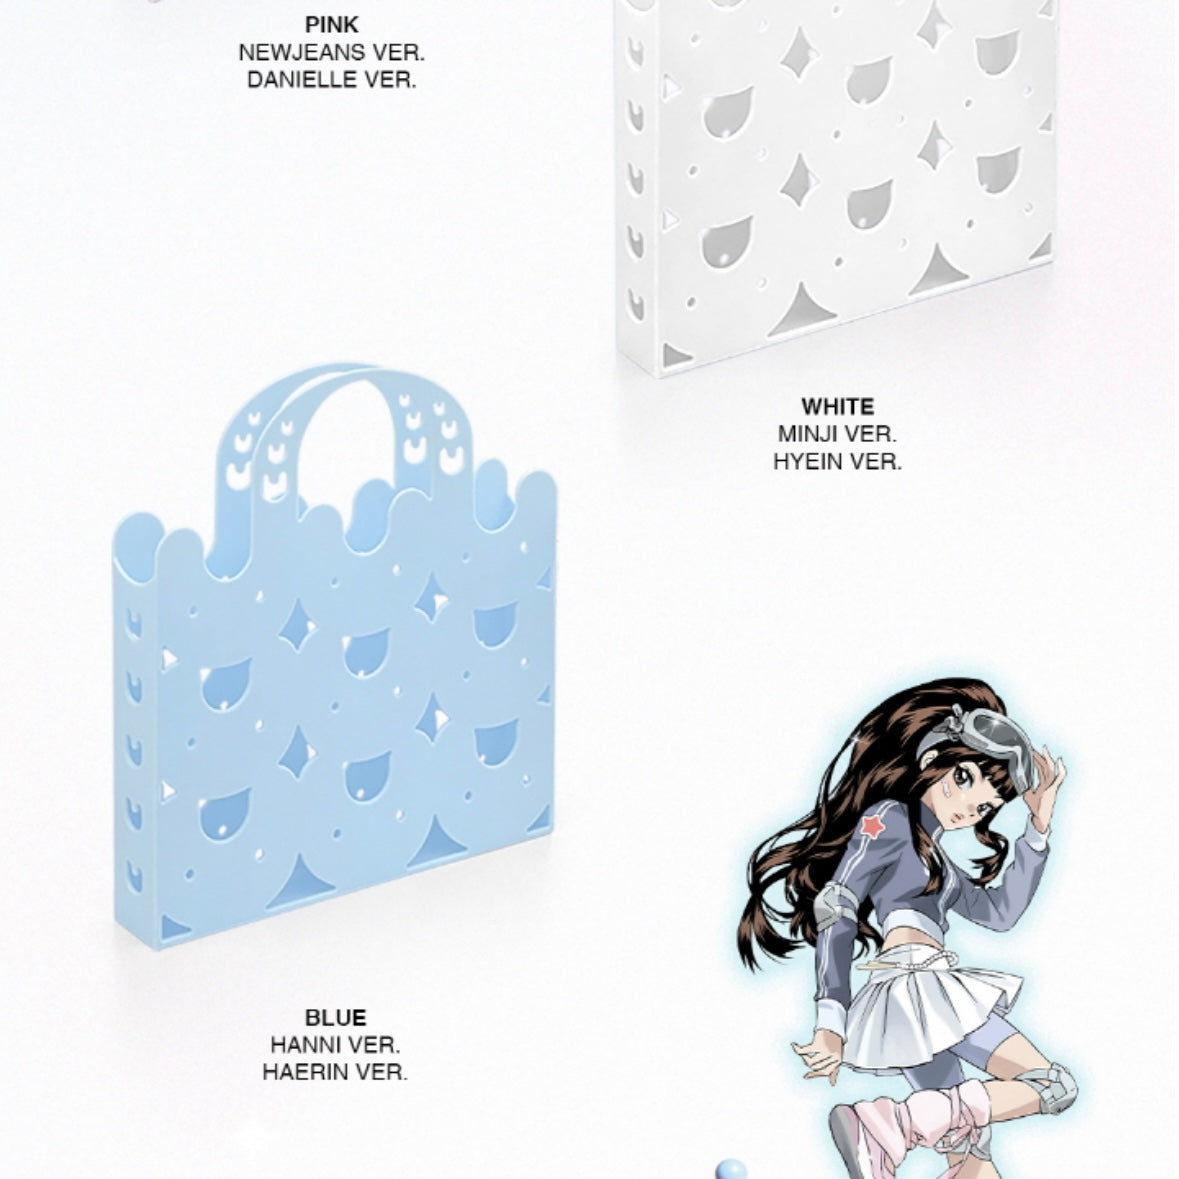 NEWJEANS - 2ND EP 'GET UP' [BUNNY BEACH BAG VER.] (6 VERSIONS)